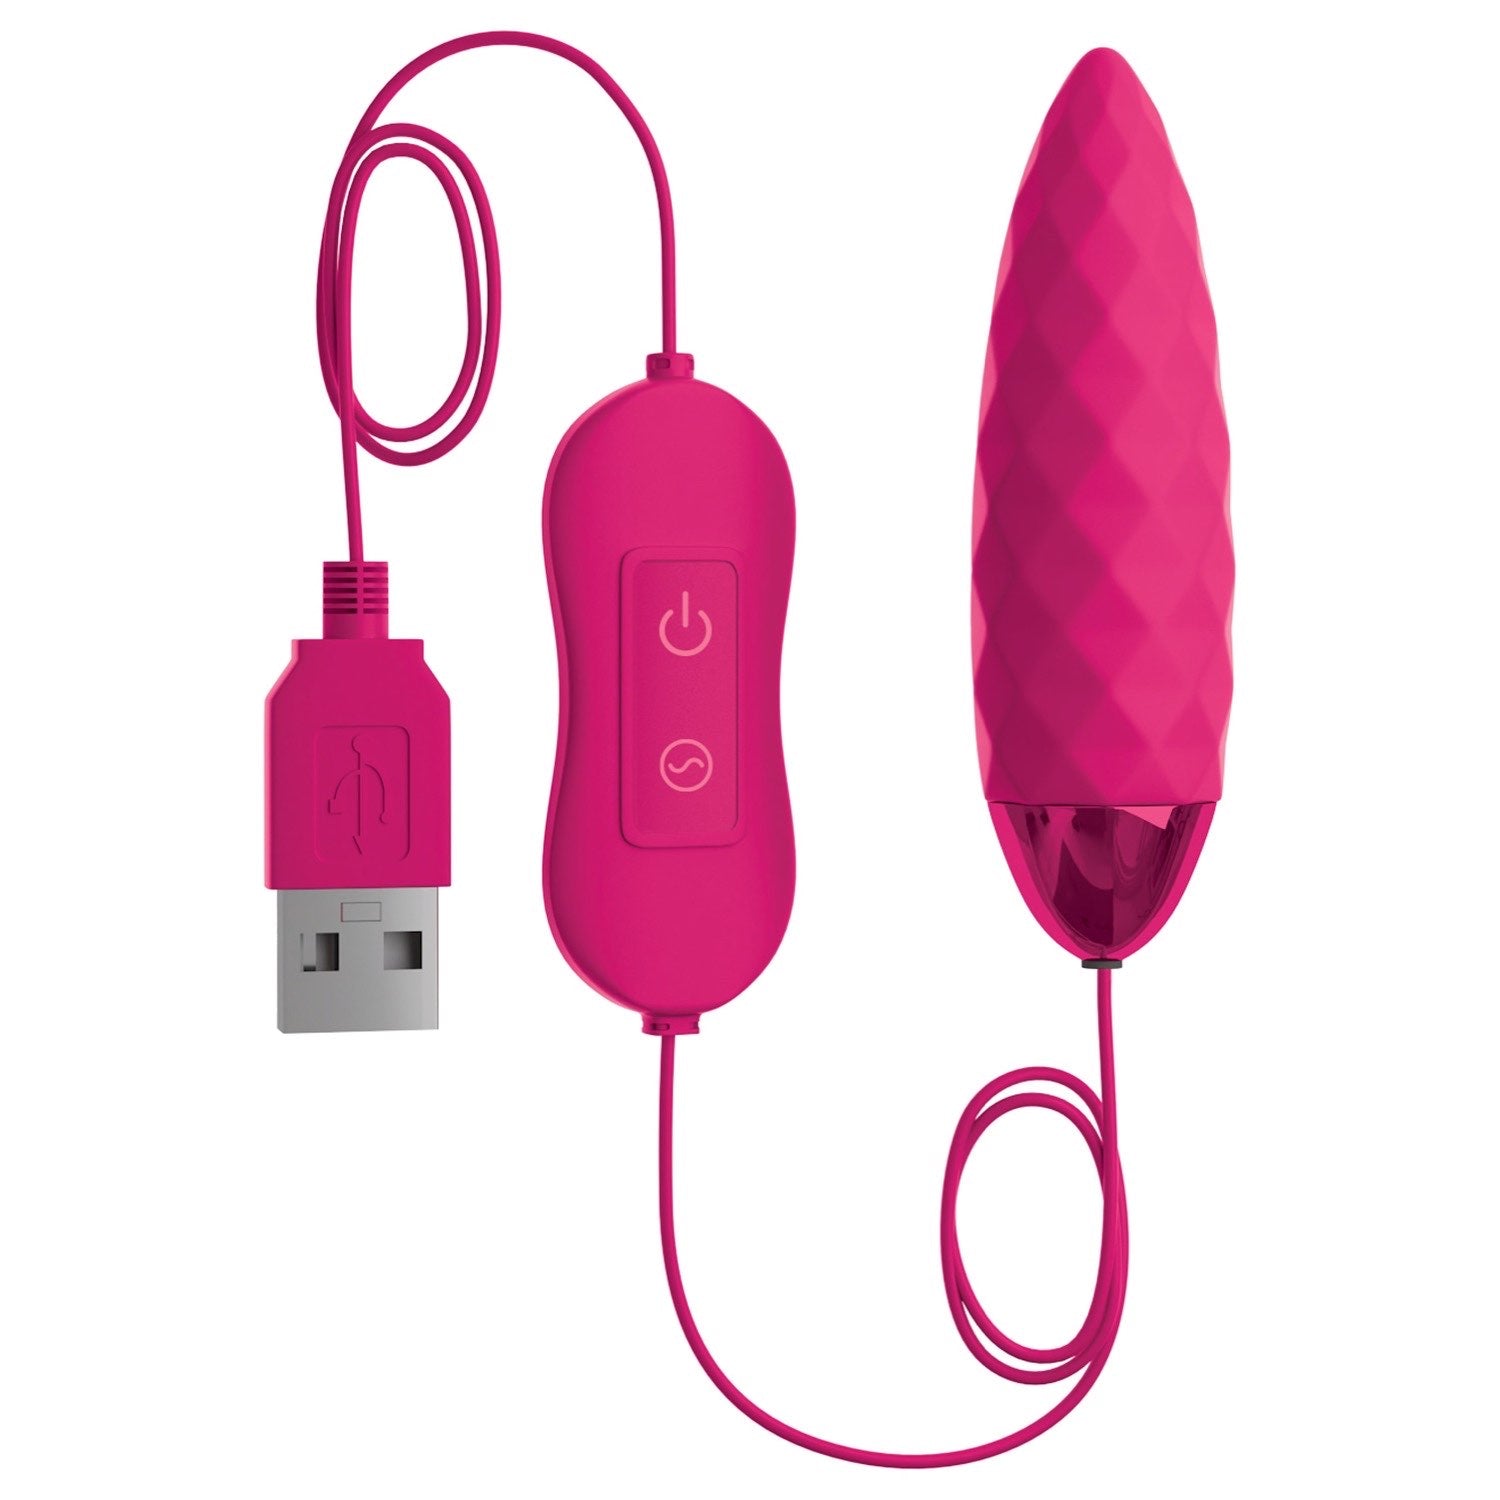 Omg! OMG! Bullets #Fun - Fuchsia Pink USB Powered Bullet by Pipedream